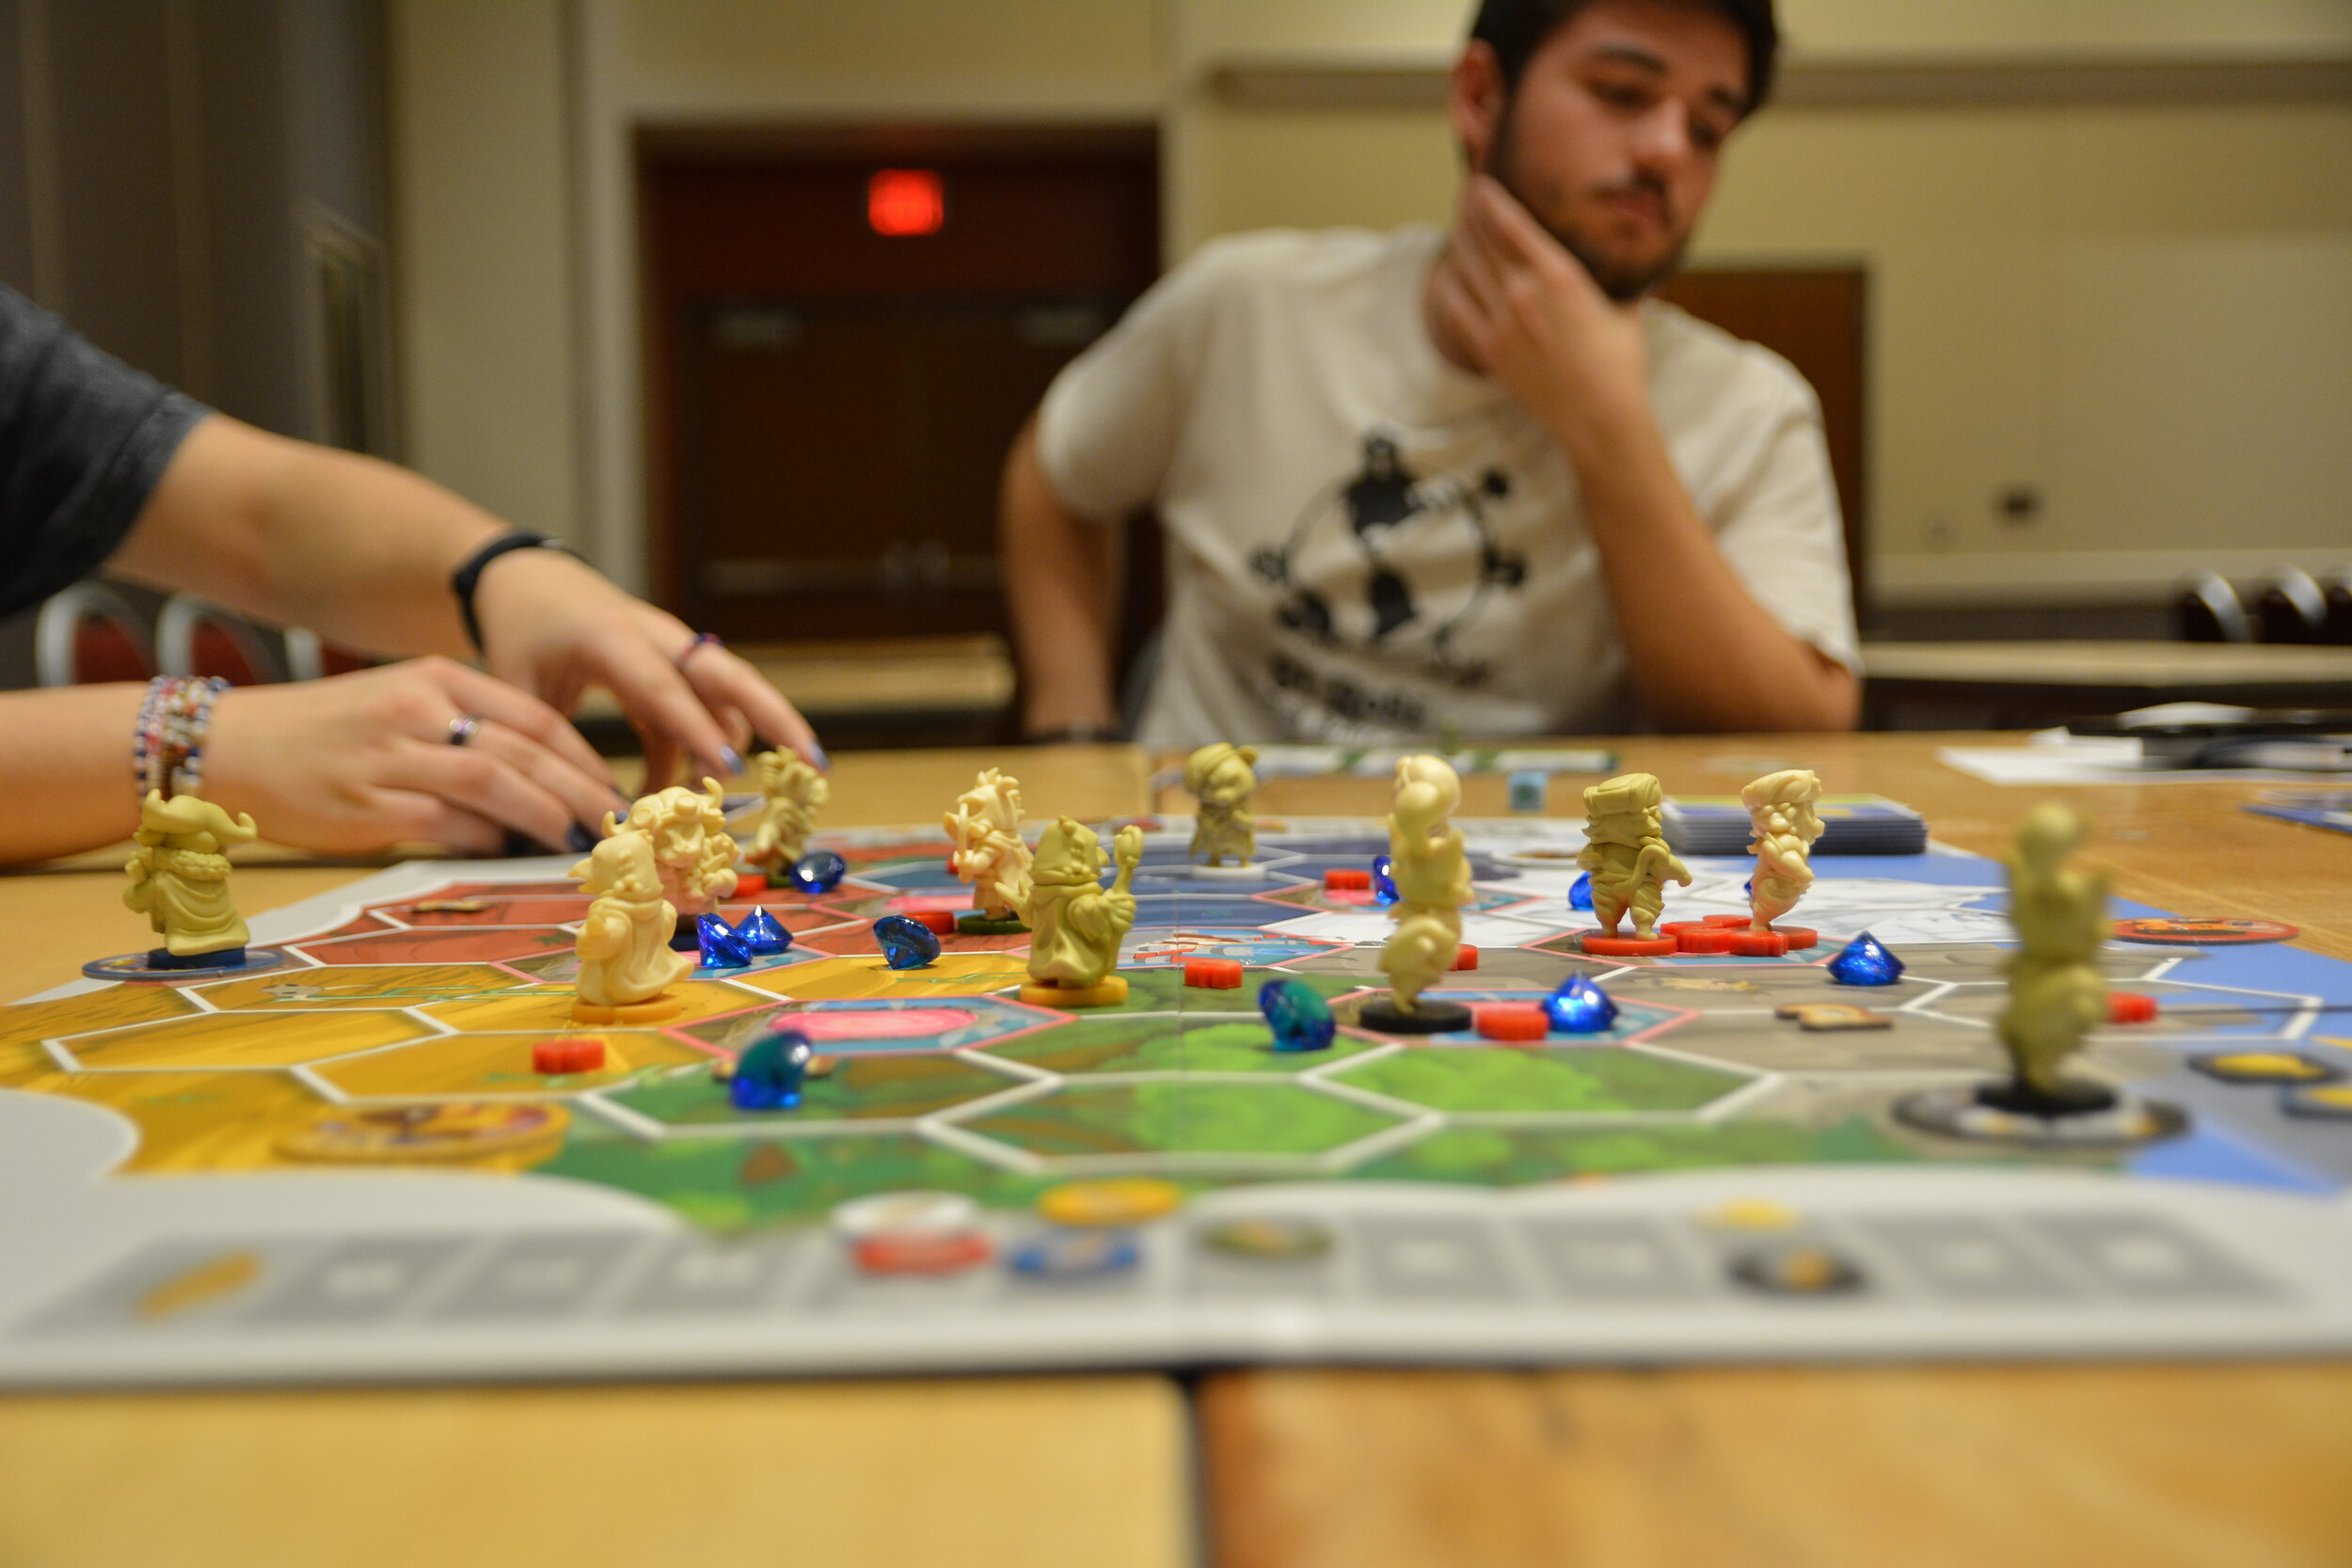 A close up of a board game with somehands on the left and behind the board game facing the camera is a blurry person.